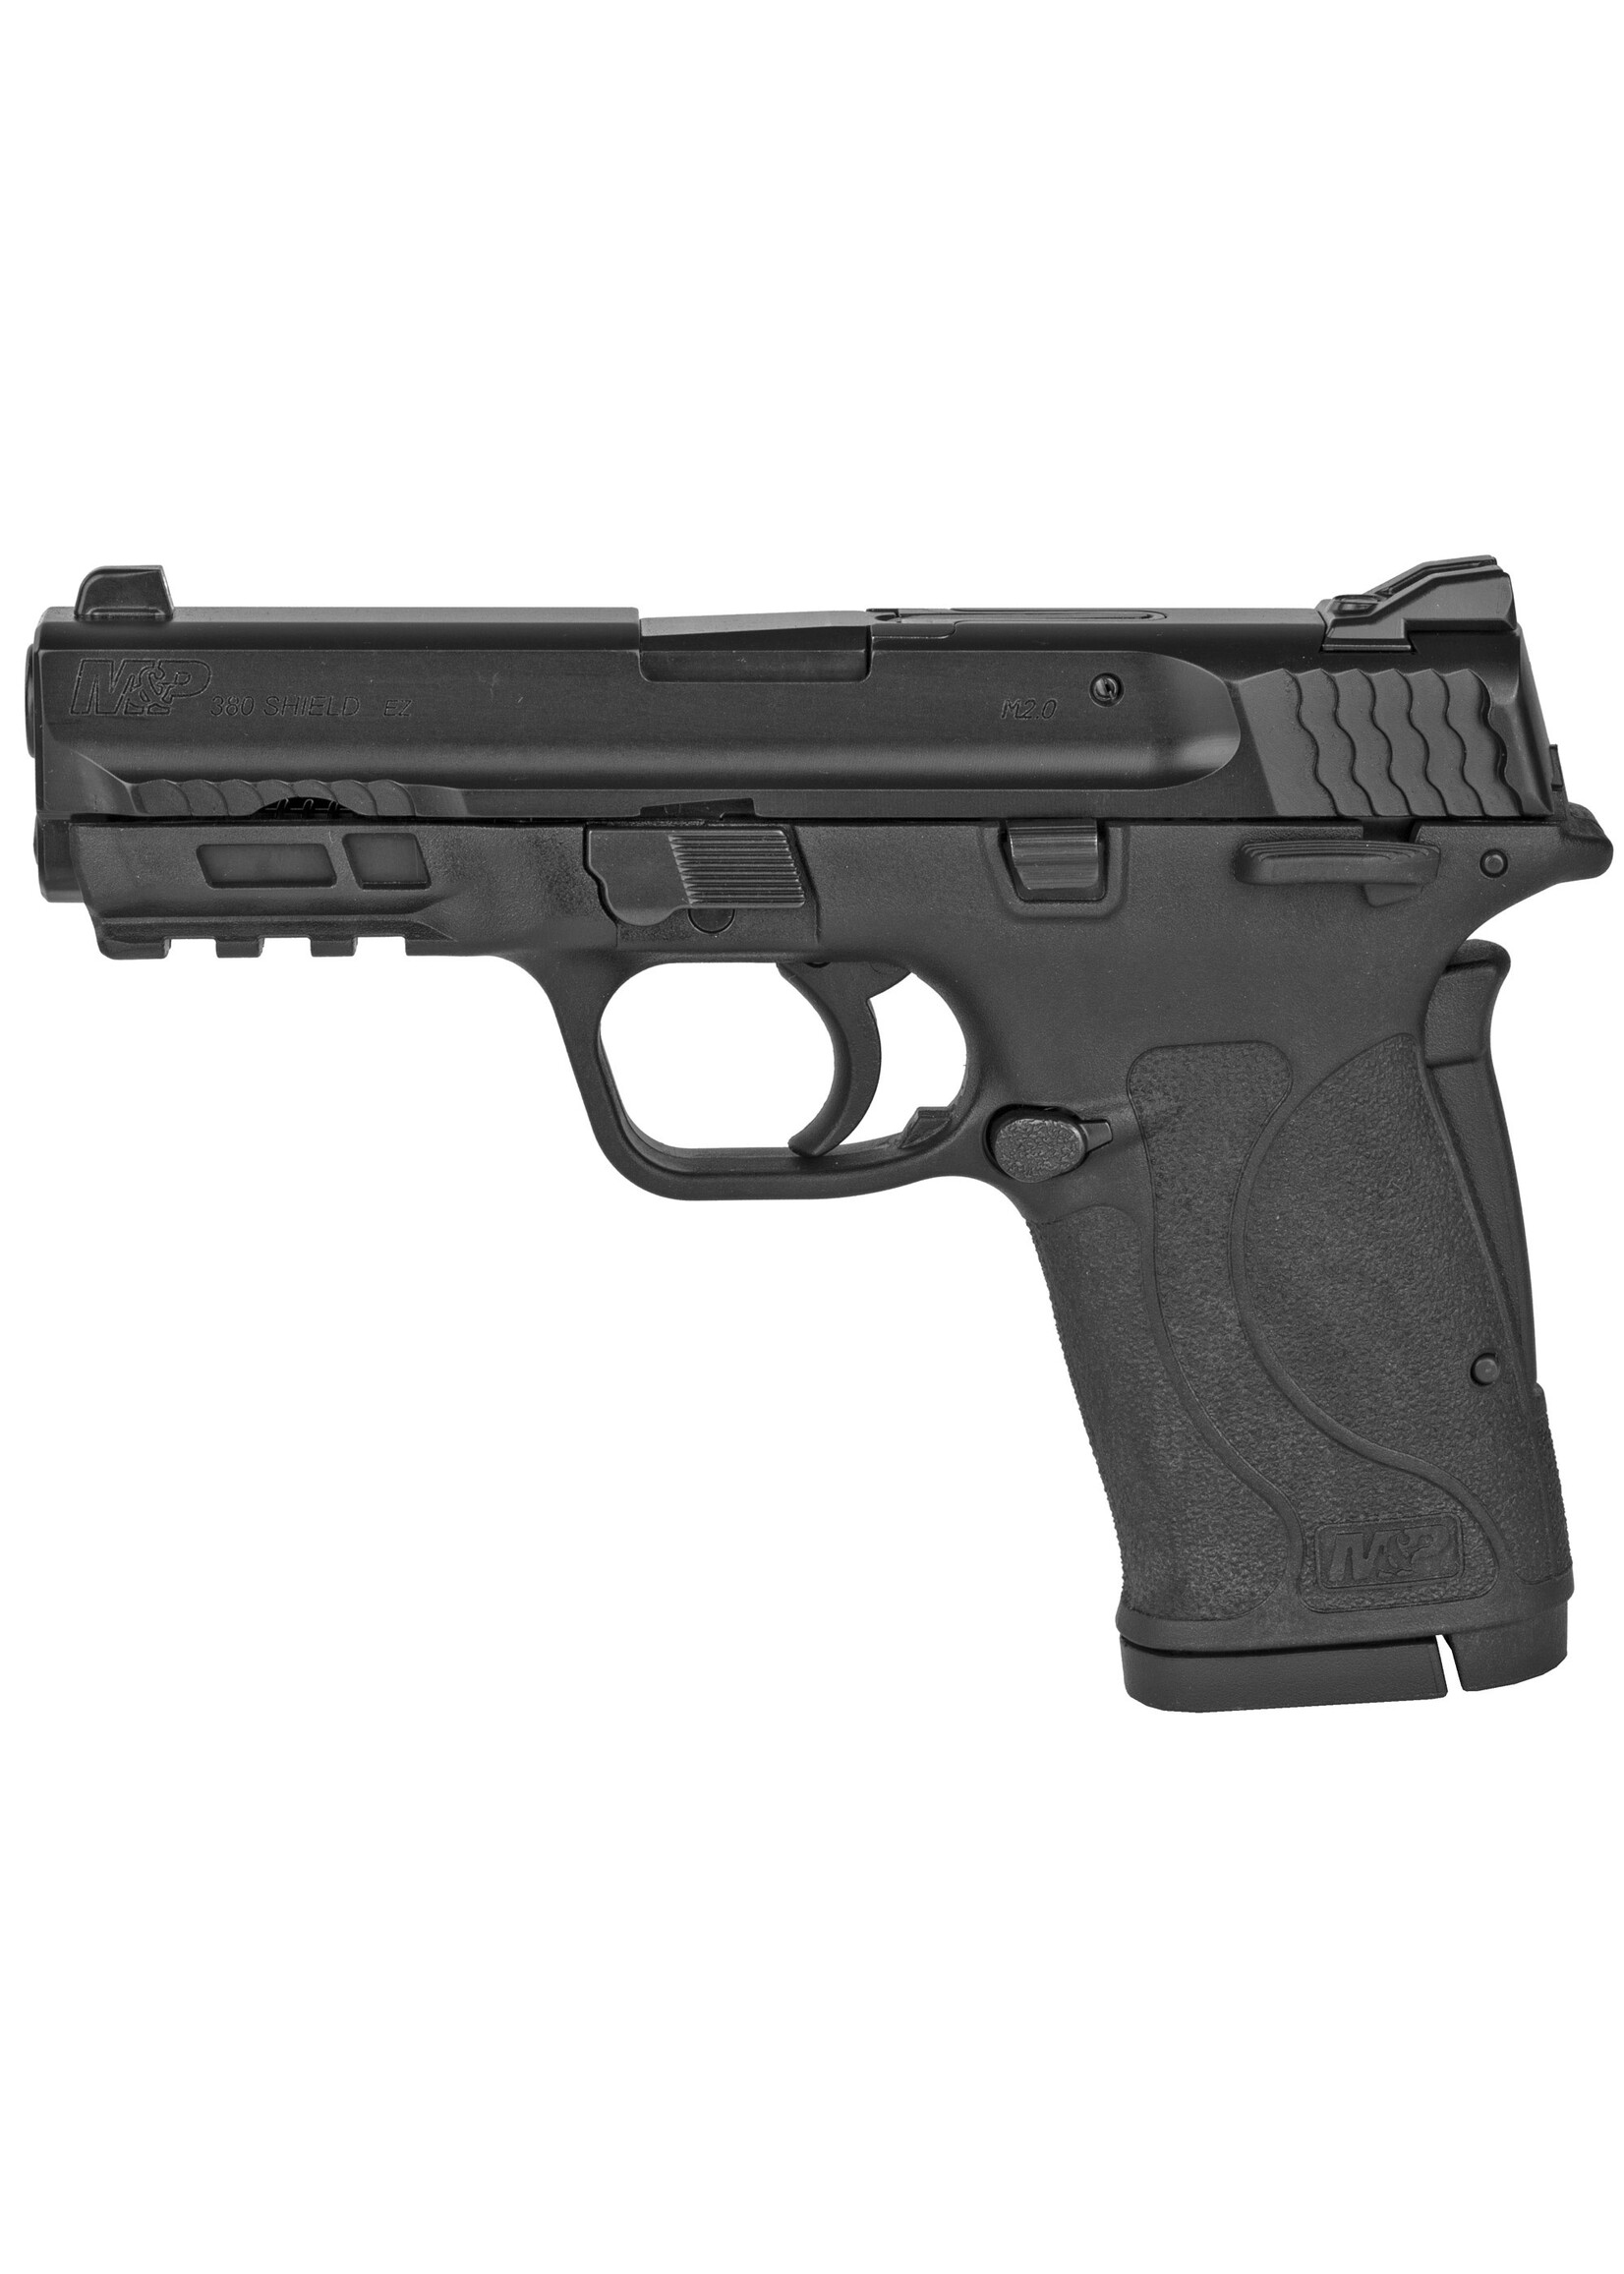 Smith and Wesson (S&W) Smith & Wesson 11663 M&P Shield EZ Compact Slim 380 ACP 8+1 3.67" Black Armornite Barrel & Serrated Slide, Matte Black Polymer Frame w/Picatinny Rail, Black Polymer Grips Right Hand